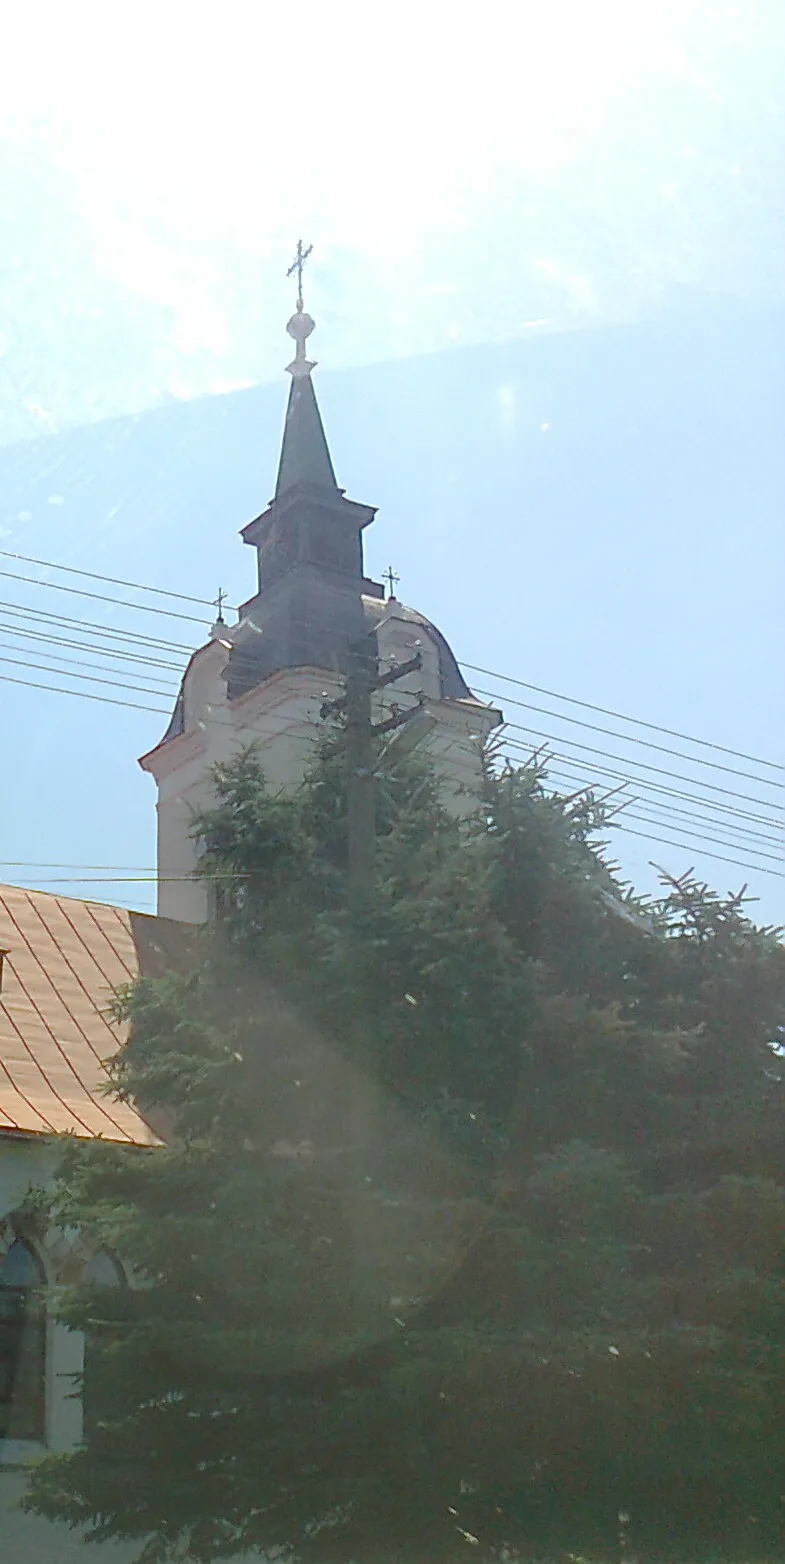 Photo showing: Roman Catholic church of the Transfiguration of Jesus in the village of Sliepkovce, Michalovce district, Slovakia, during the summer months (June 2021). Eclectic architecture church established in 1922.